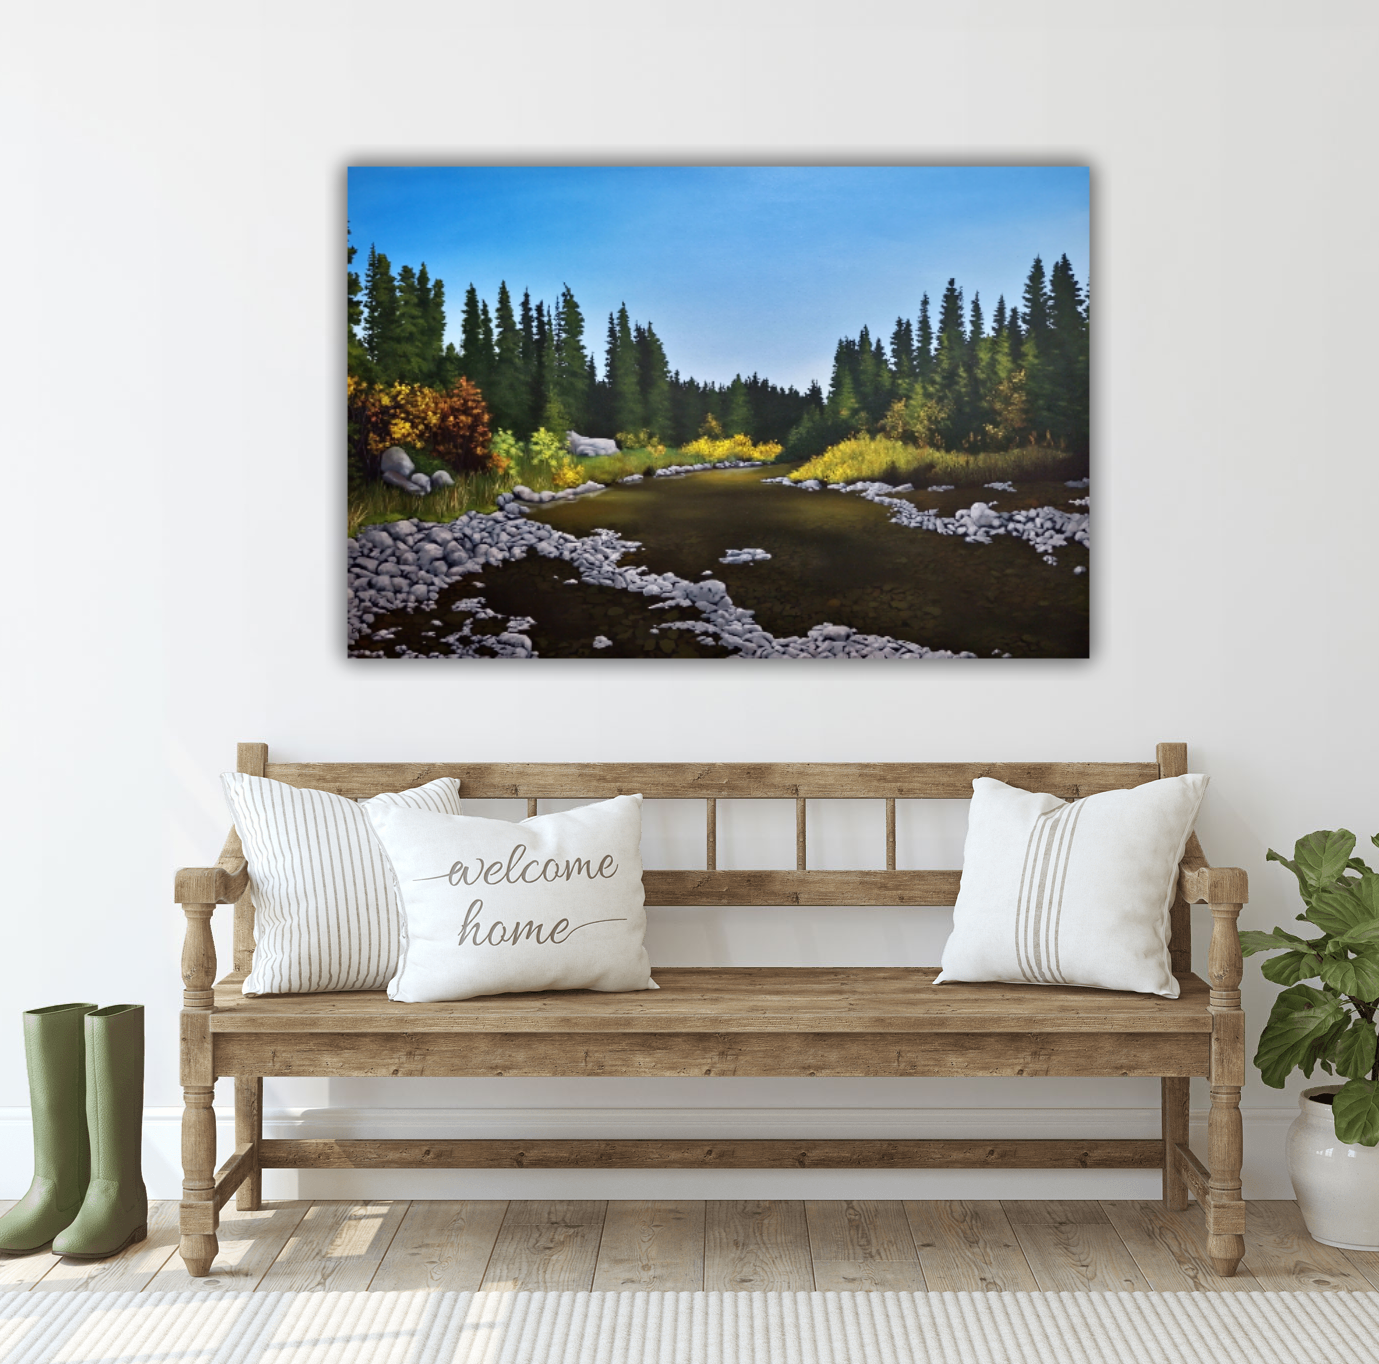 Intermission -  An original landscape painting by Christina Gouldsborough Canadian Landscape Artist hanging over a bench with pillows and rubber boots on the floor